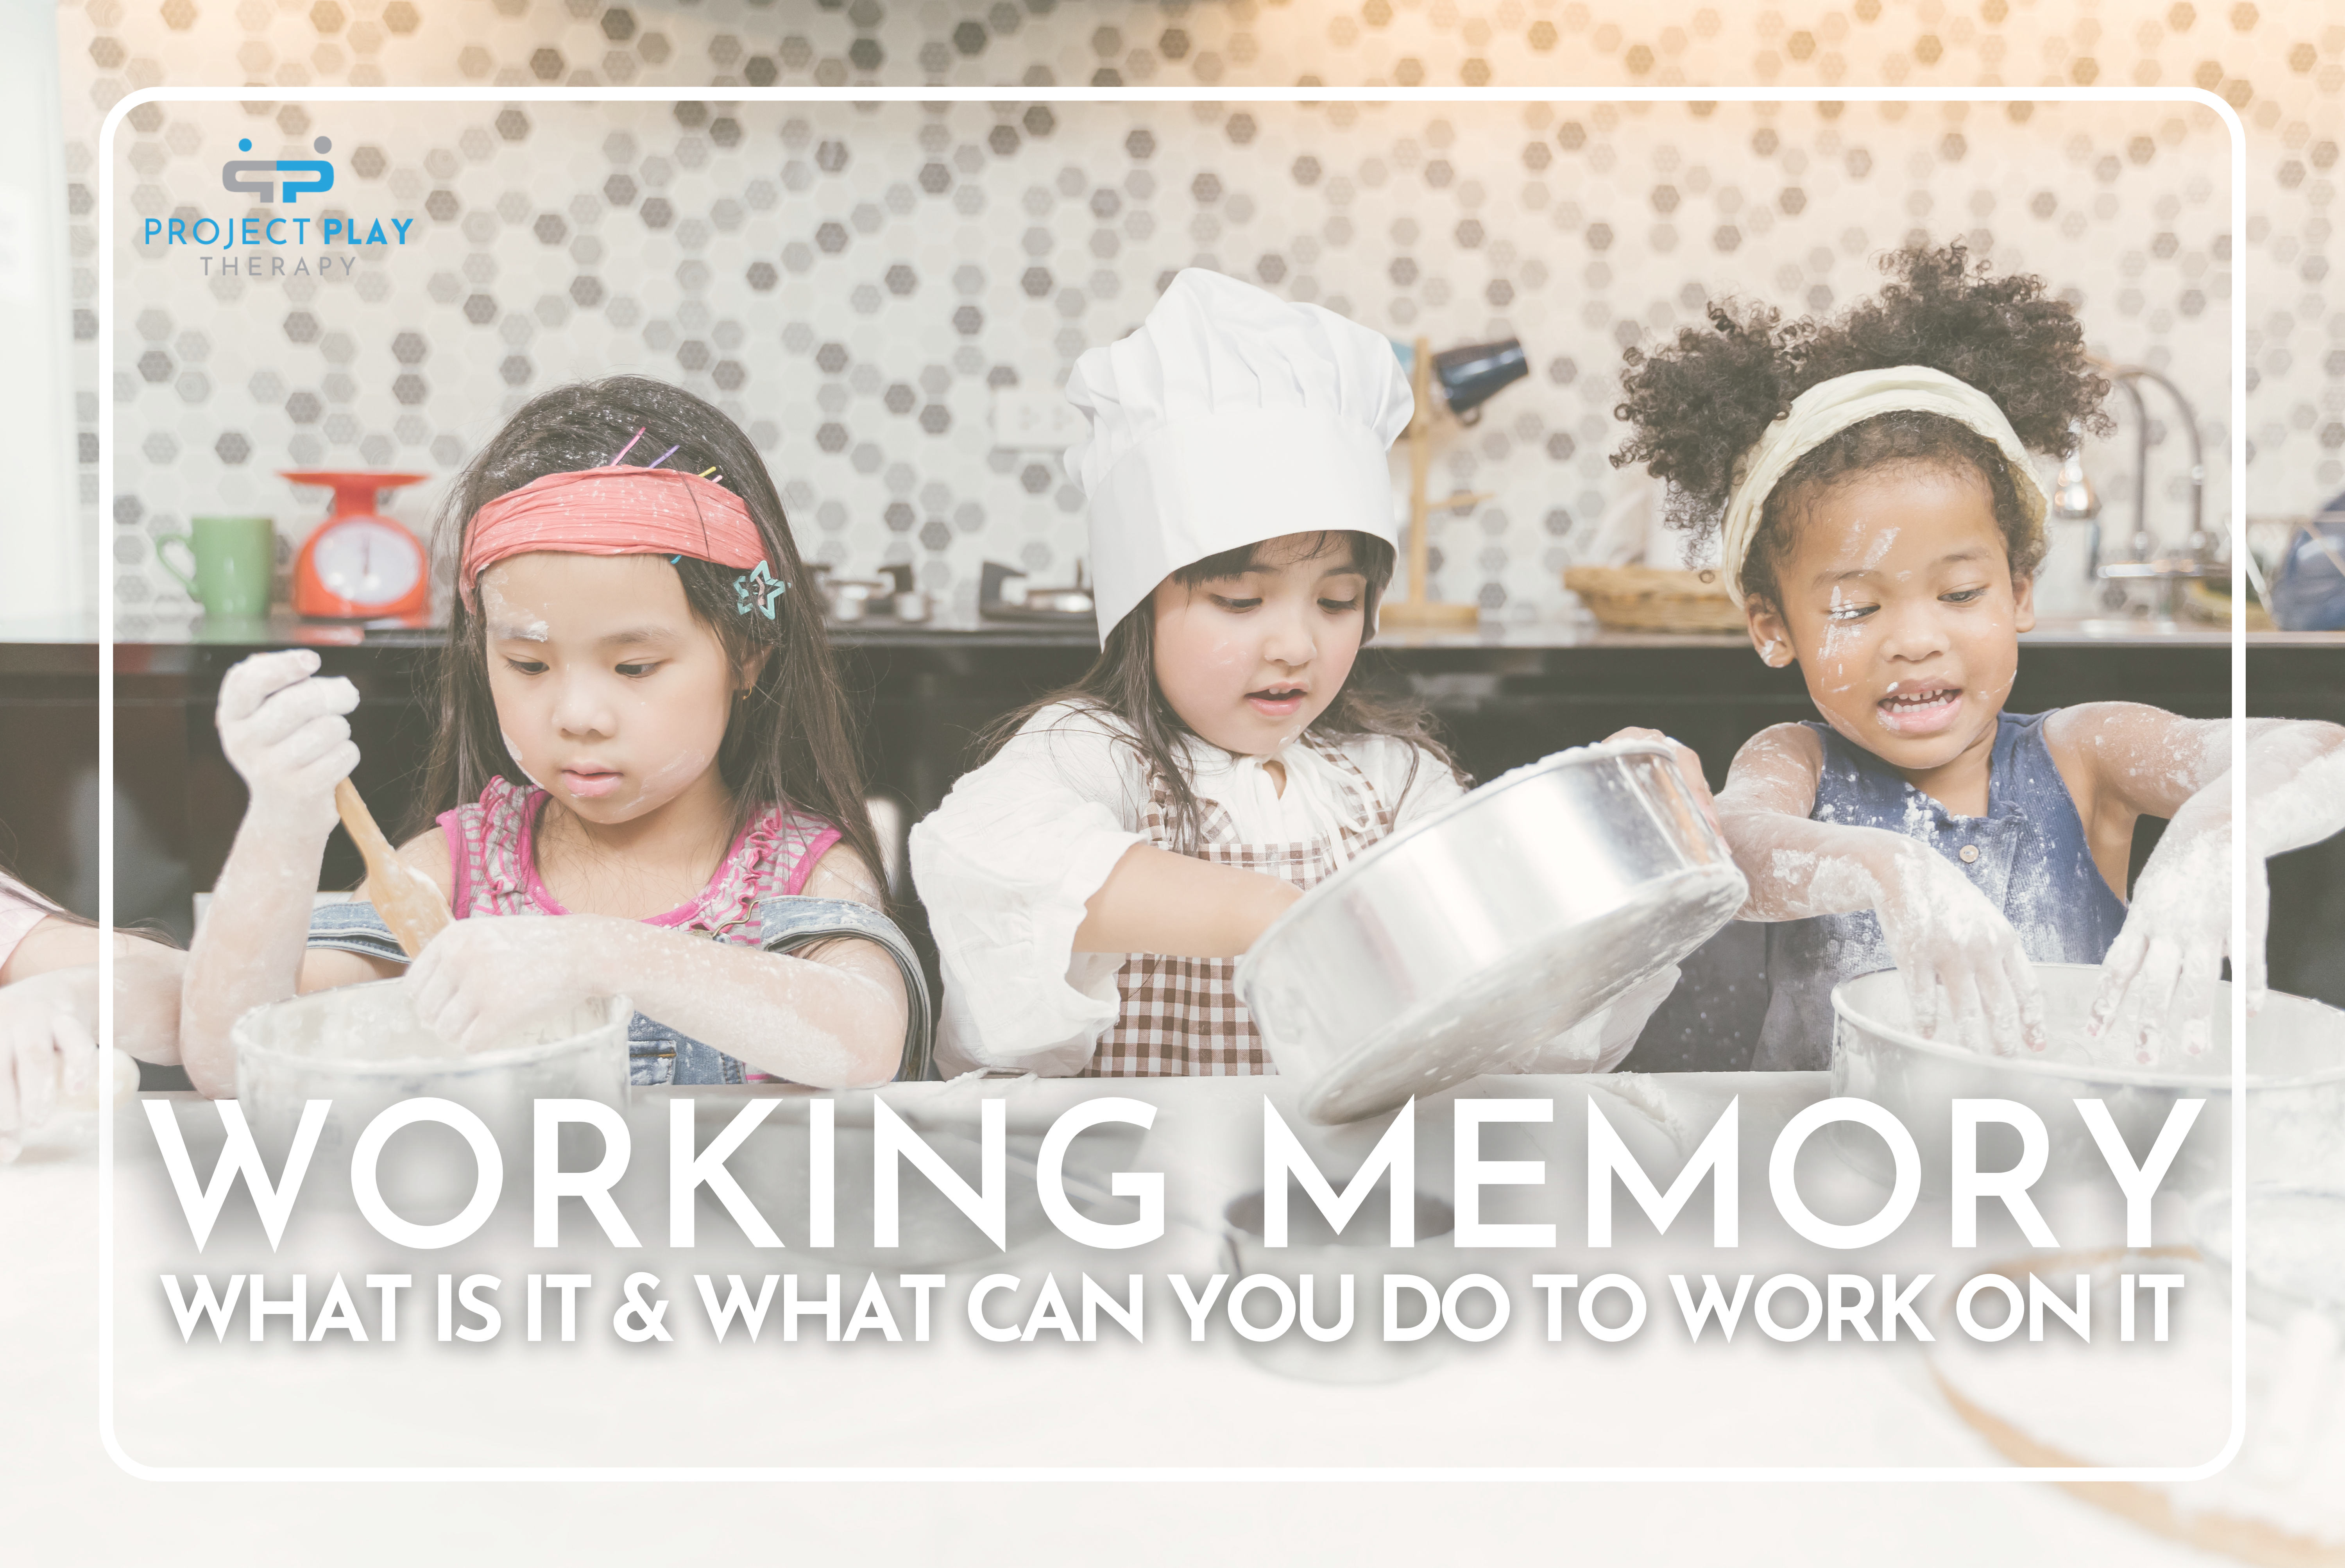 What is Working Memory?